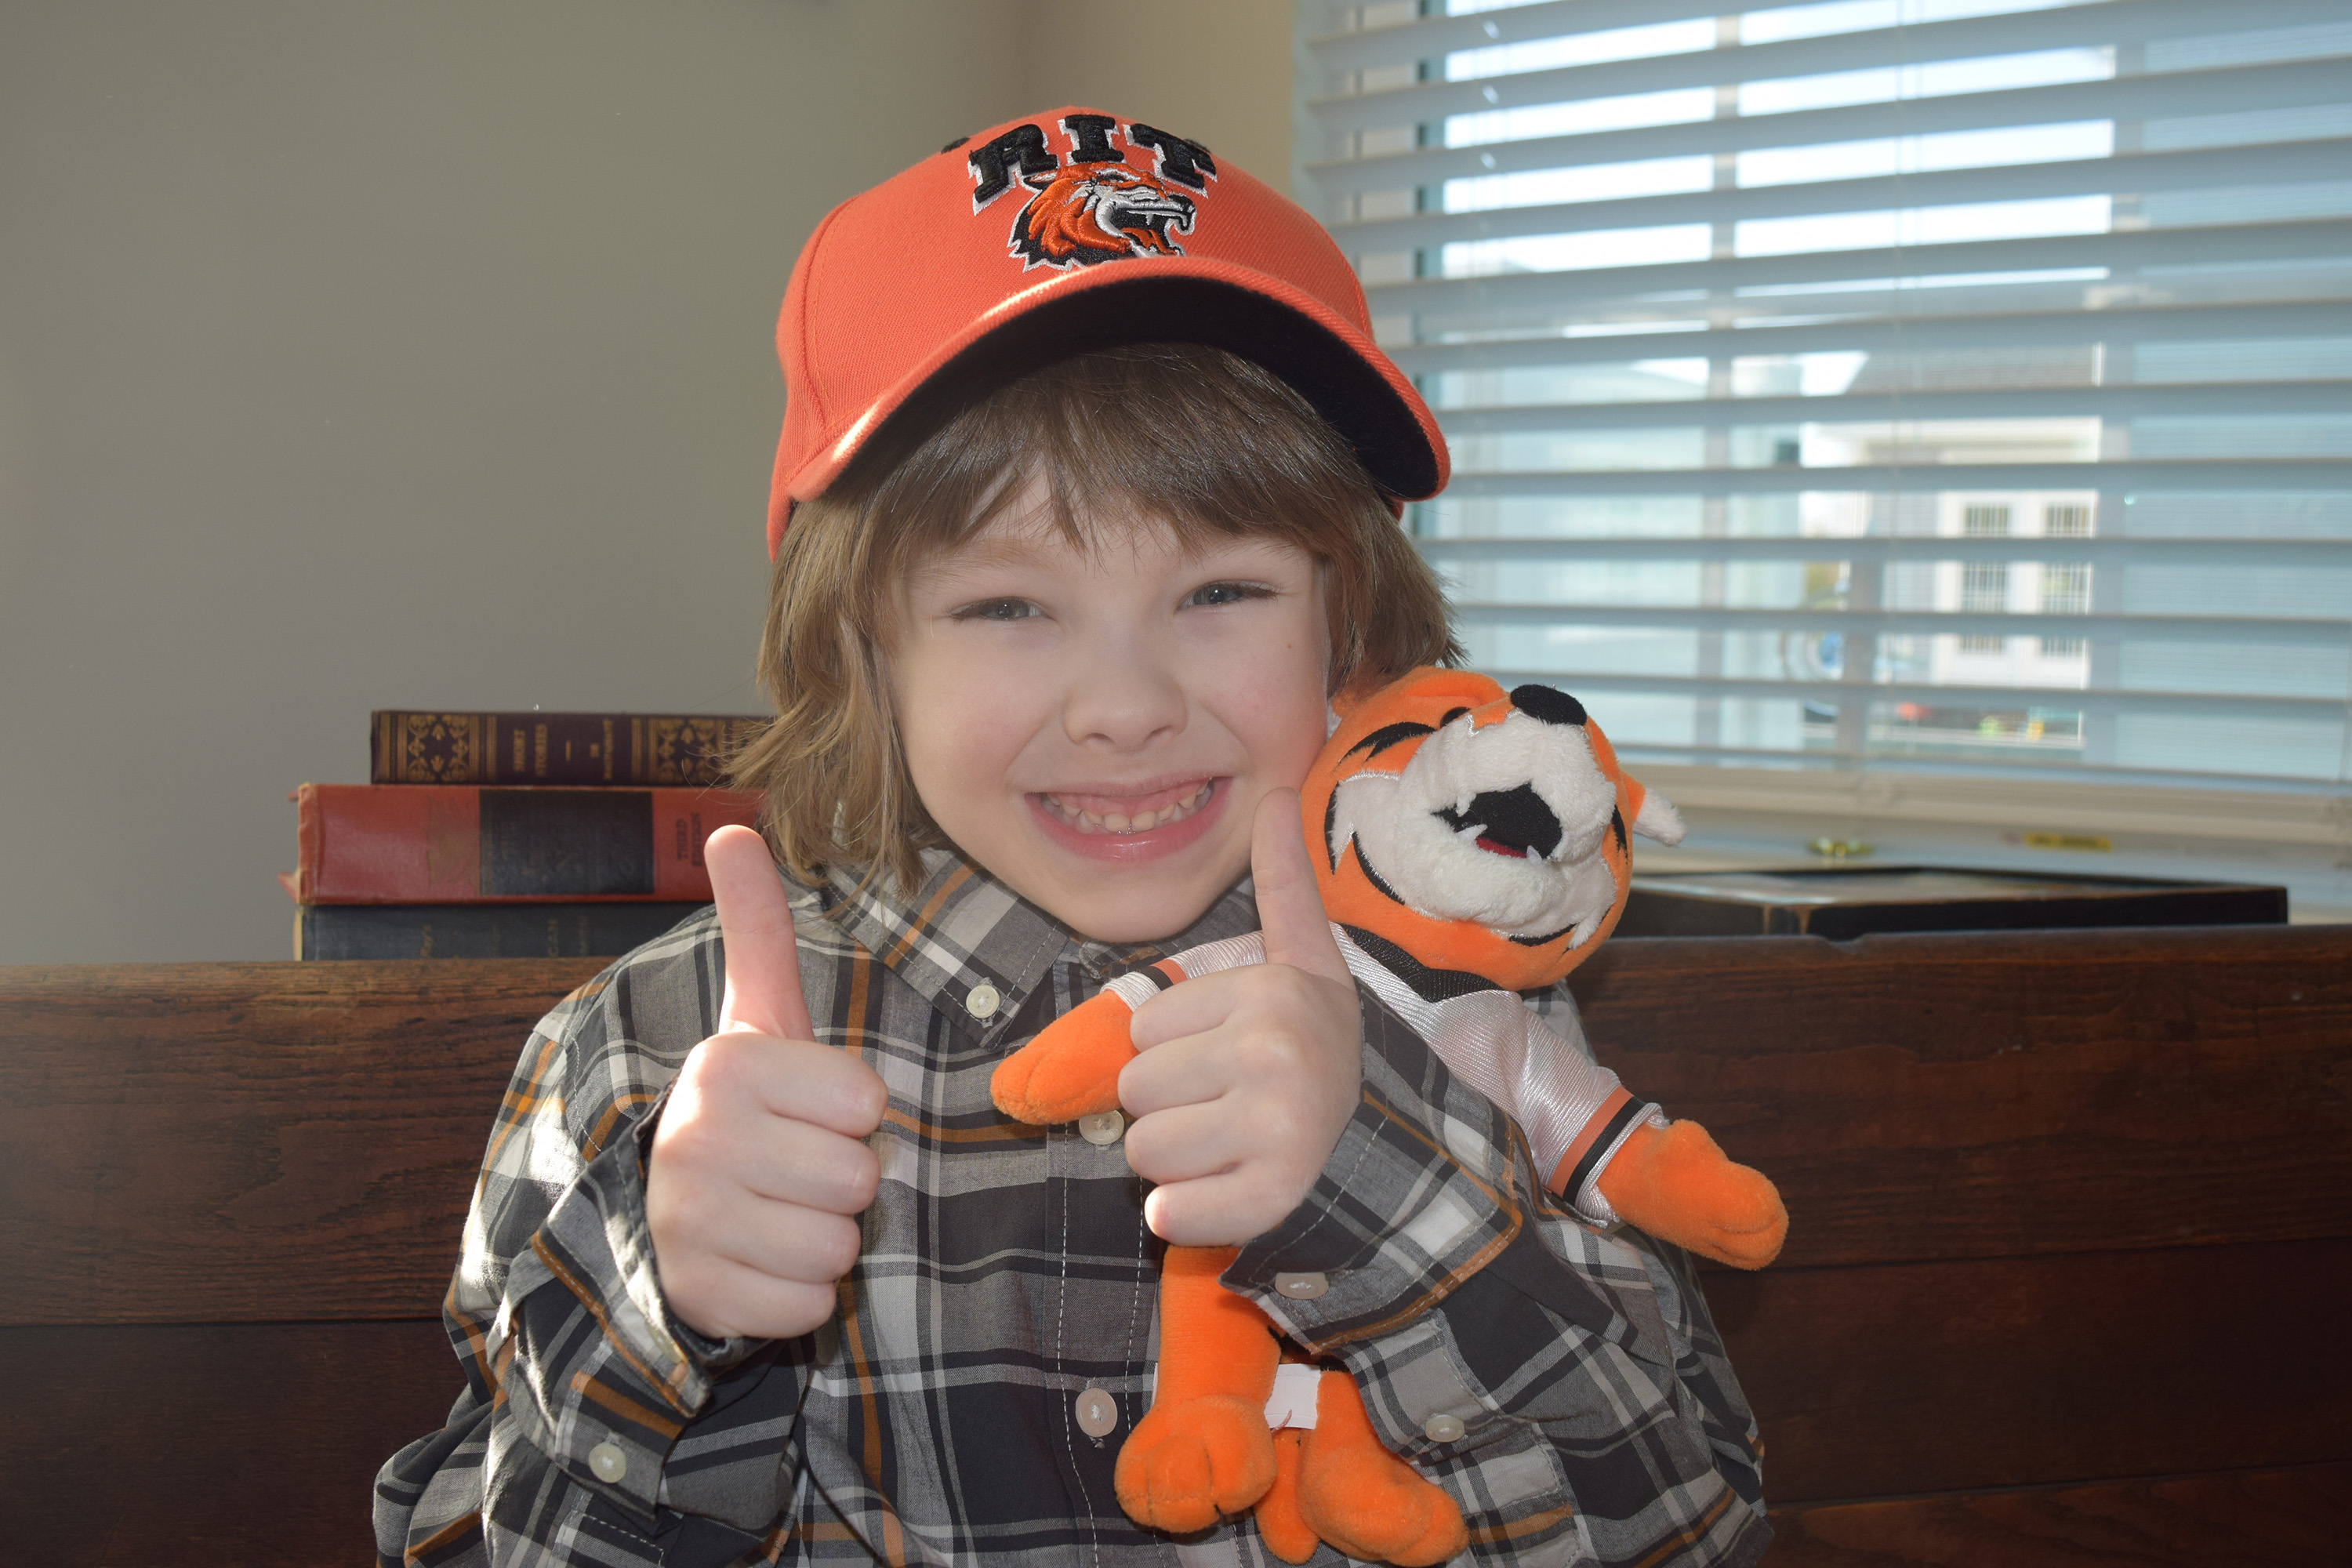 A photo of a boy wearing an RIT hat giving thumbs up.